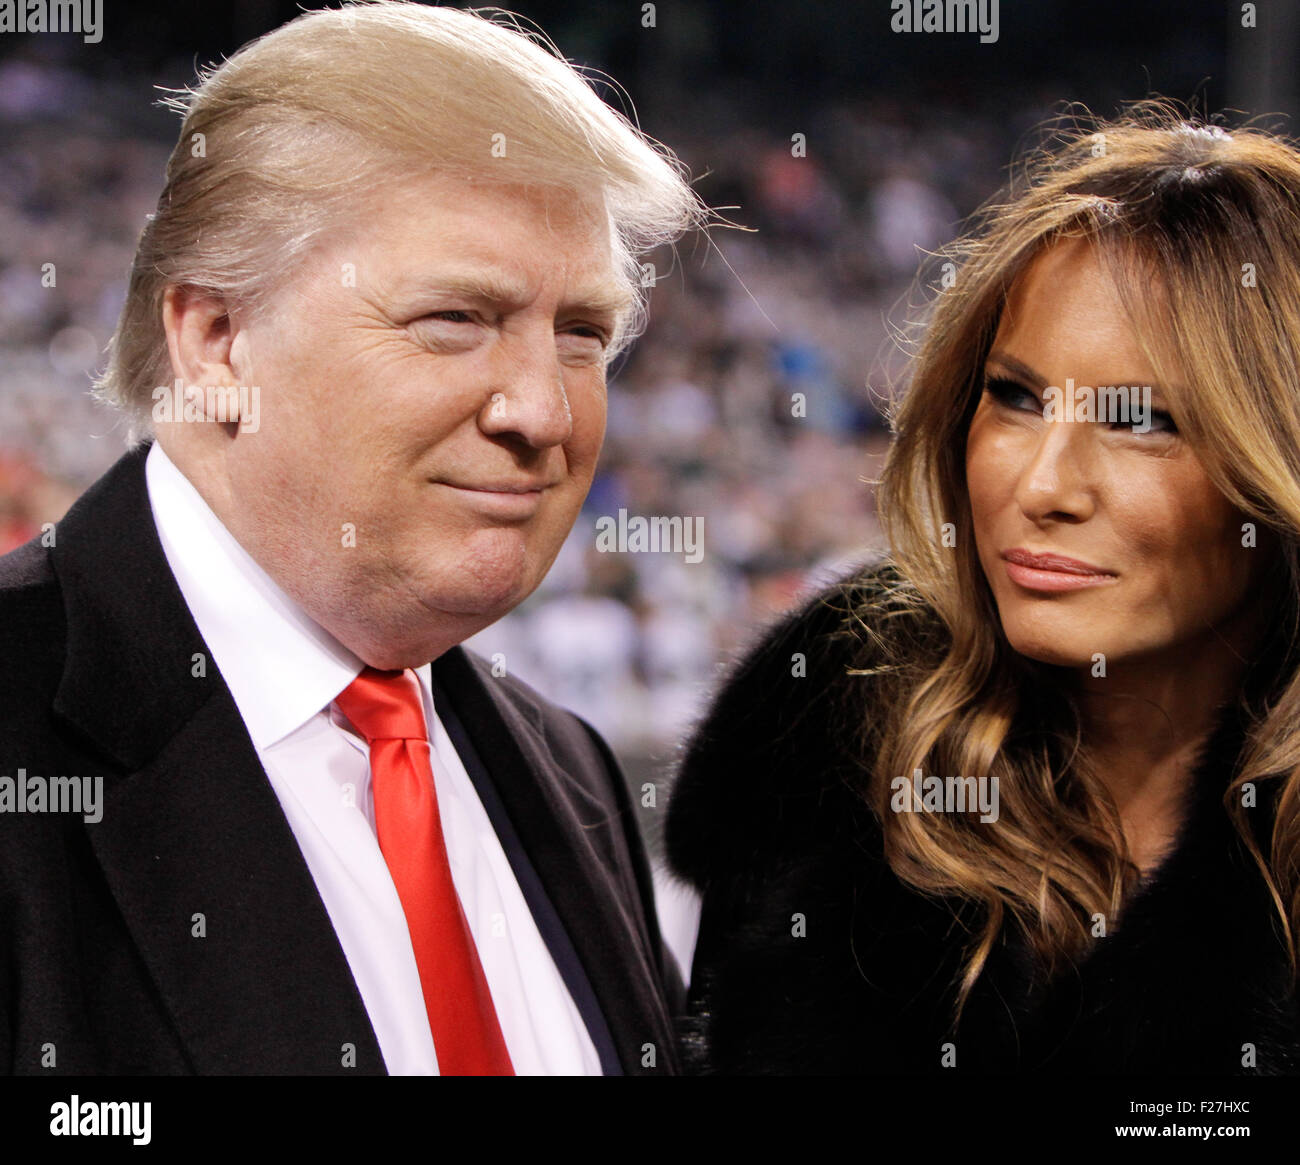 Donald Trump and wife Melania Trump at a football game at MetLife Stadium on November 13, 2011 in East Rutherford, New Jersey. Stock Photo